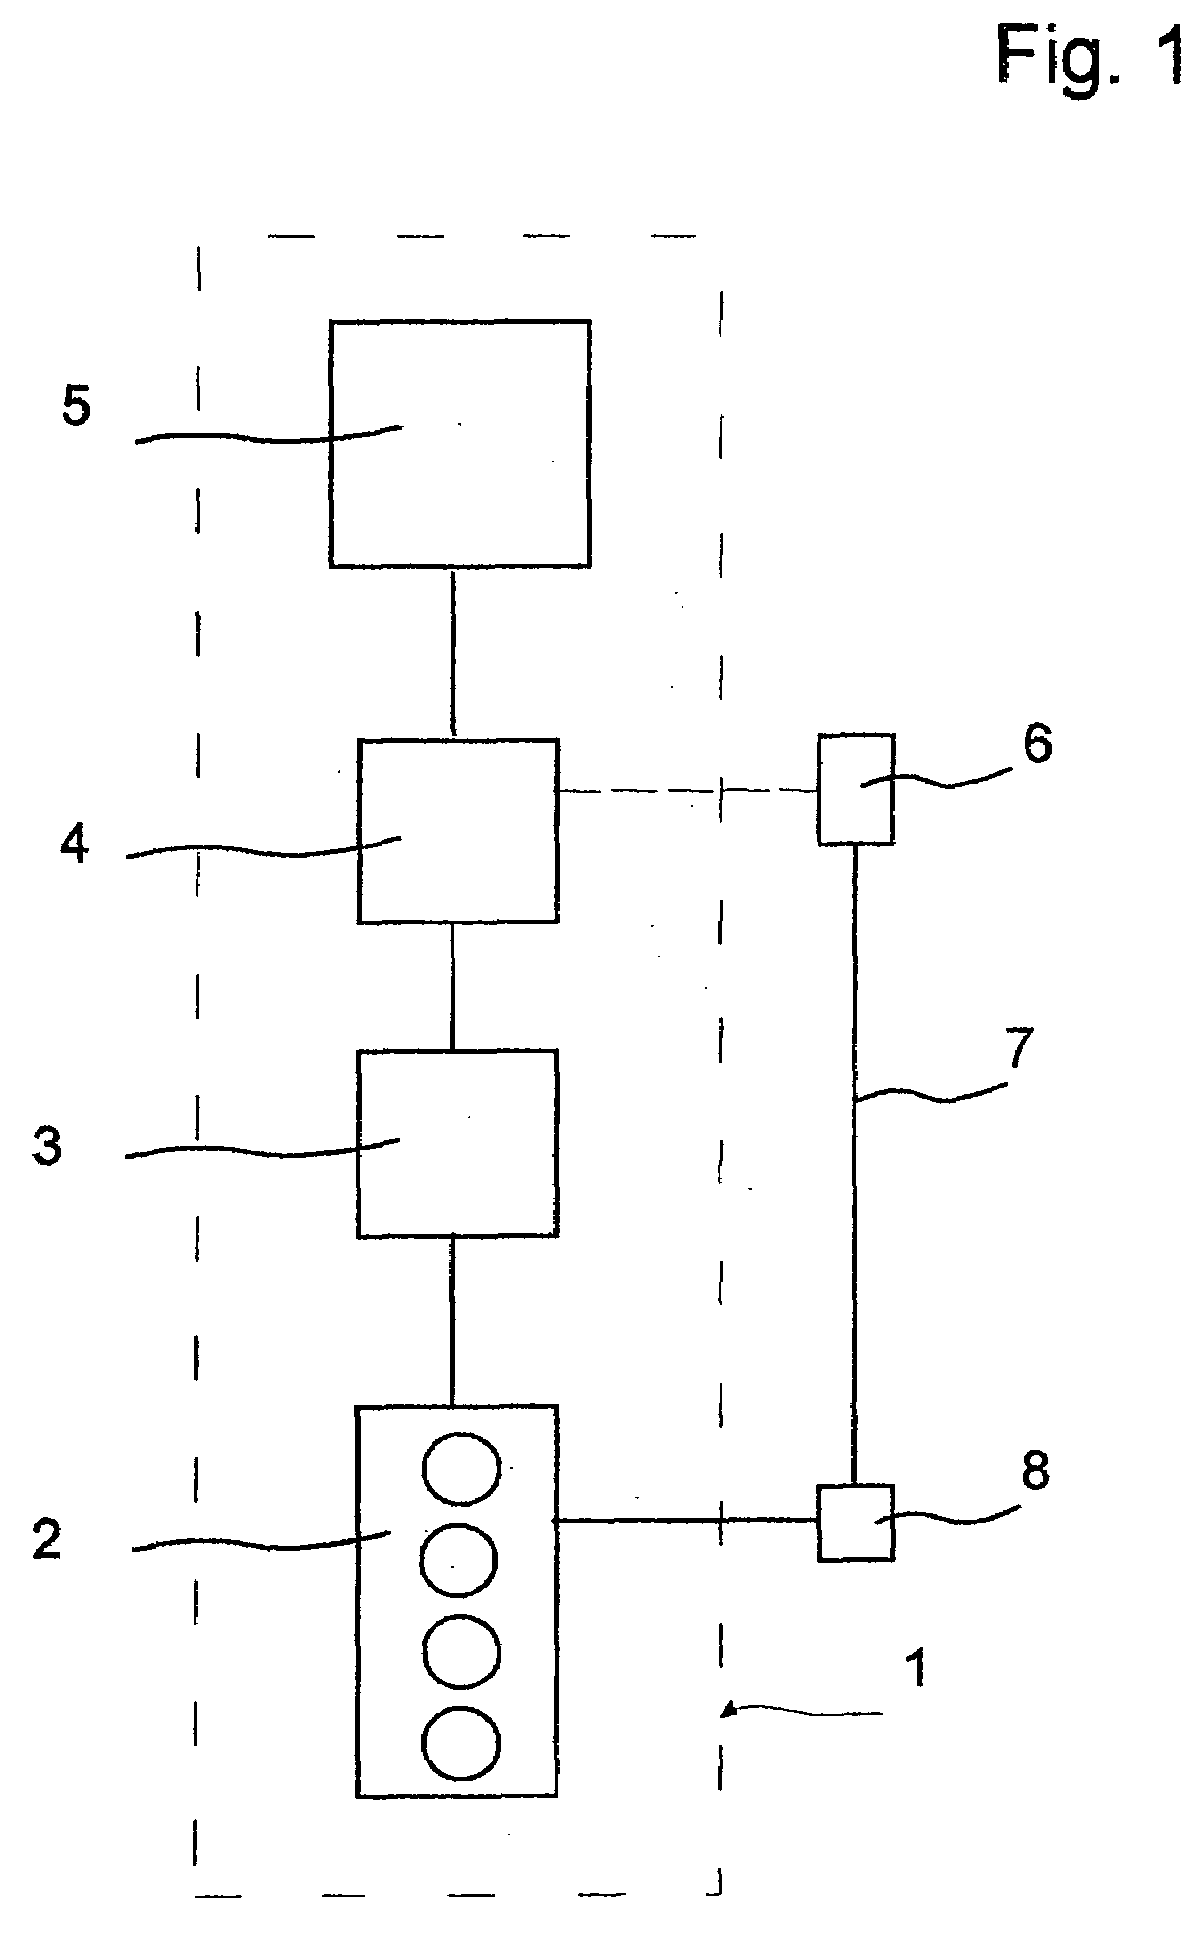 Method for operating a drive train of a vehicle